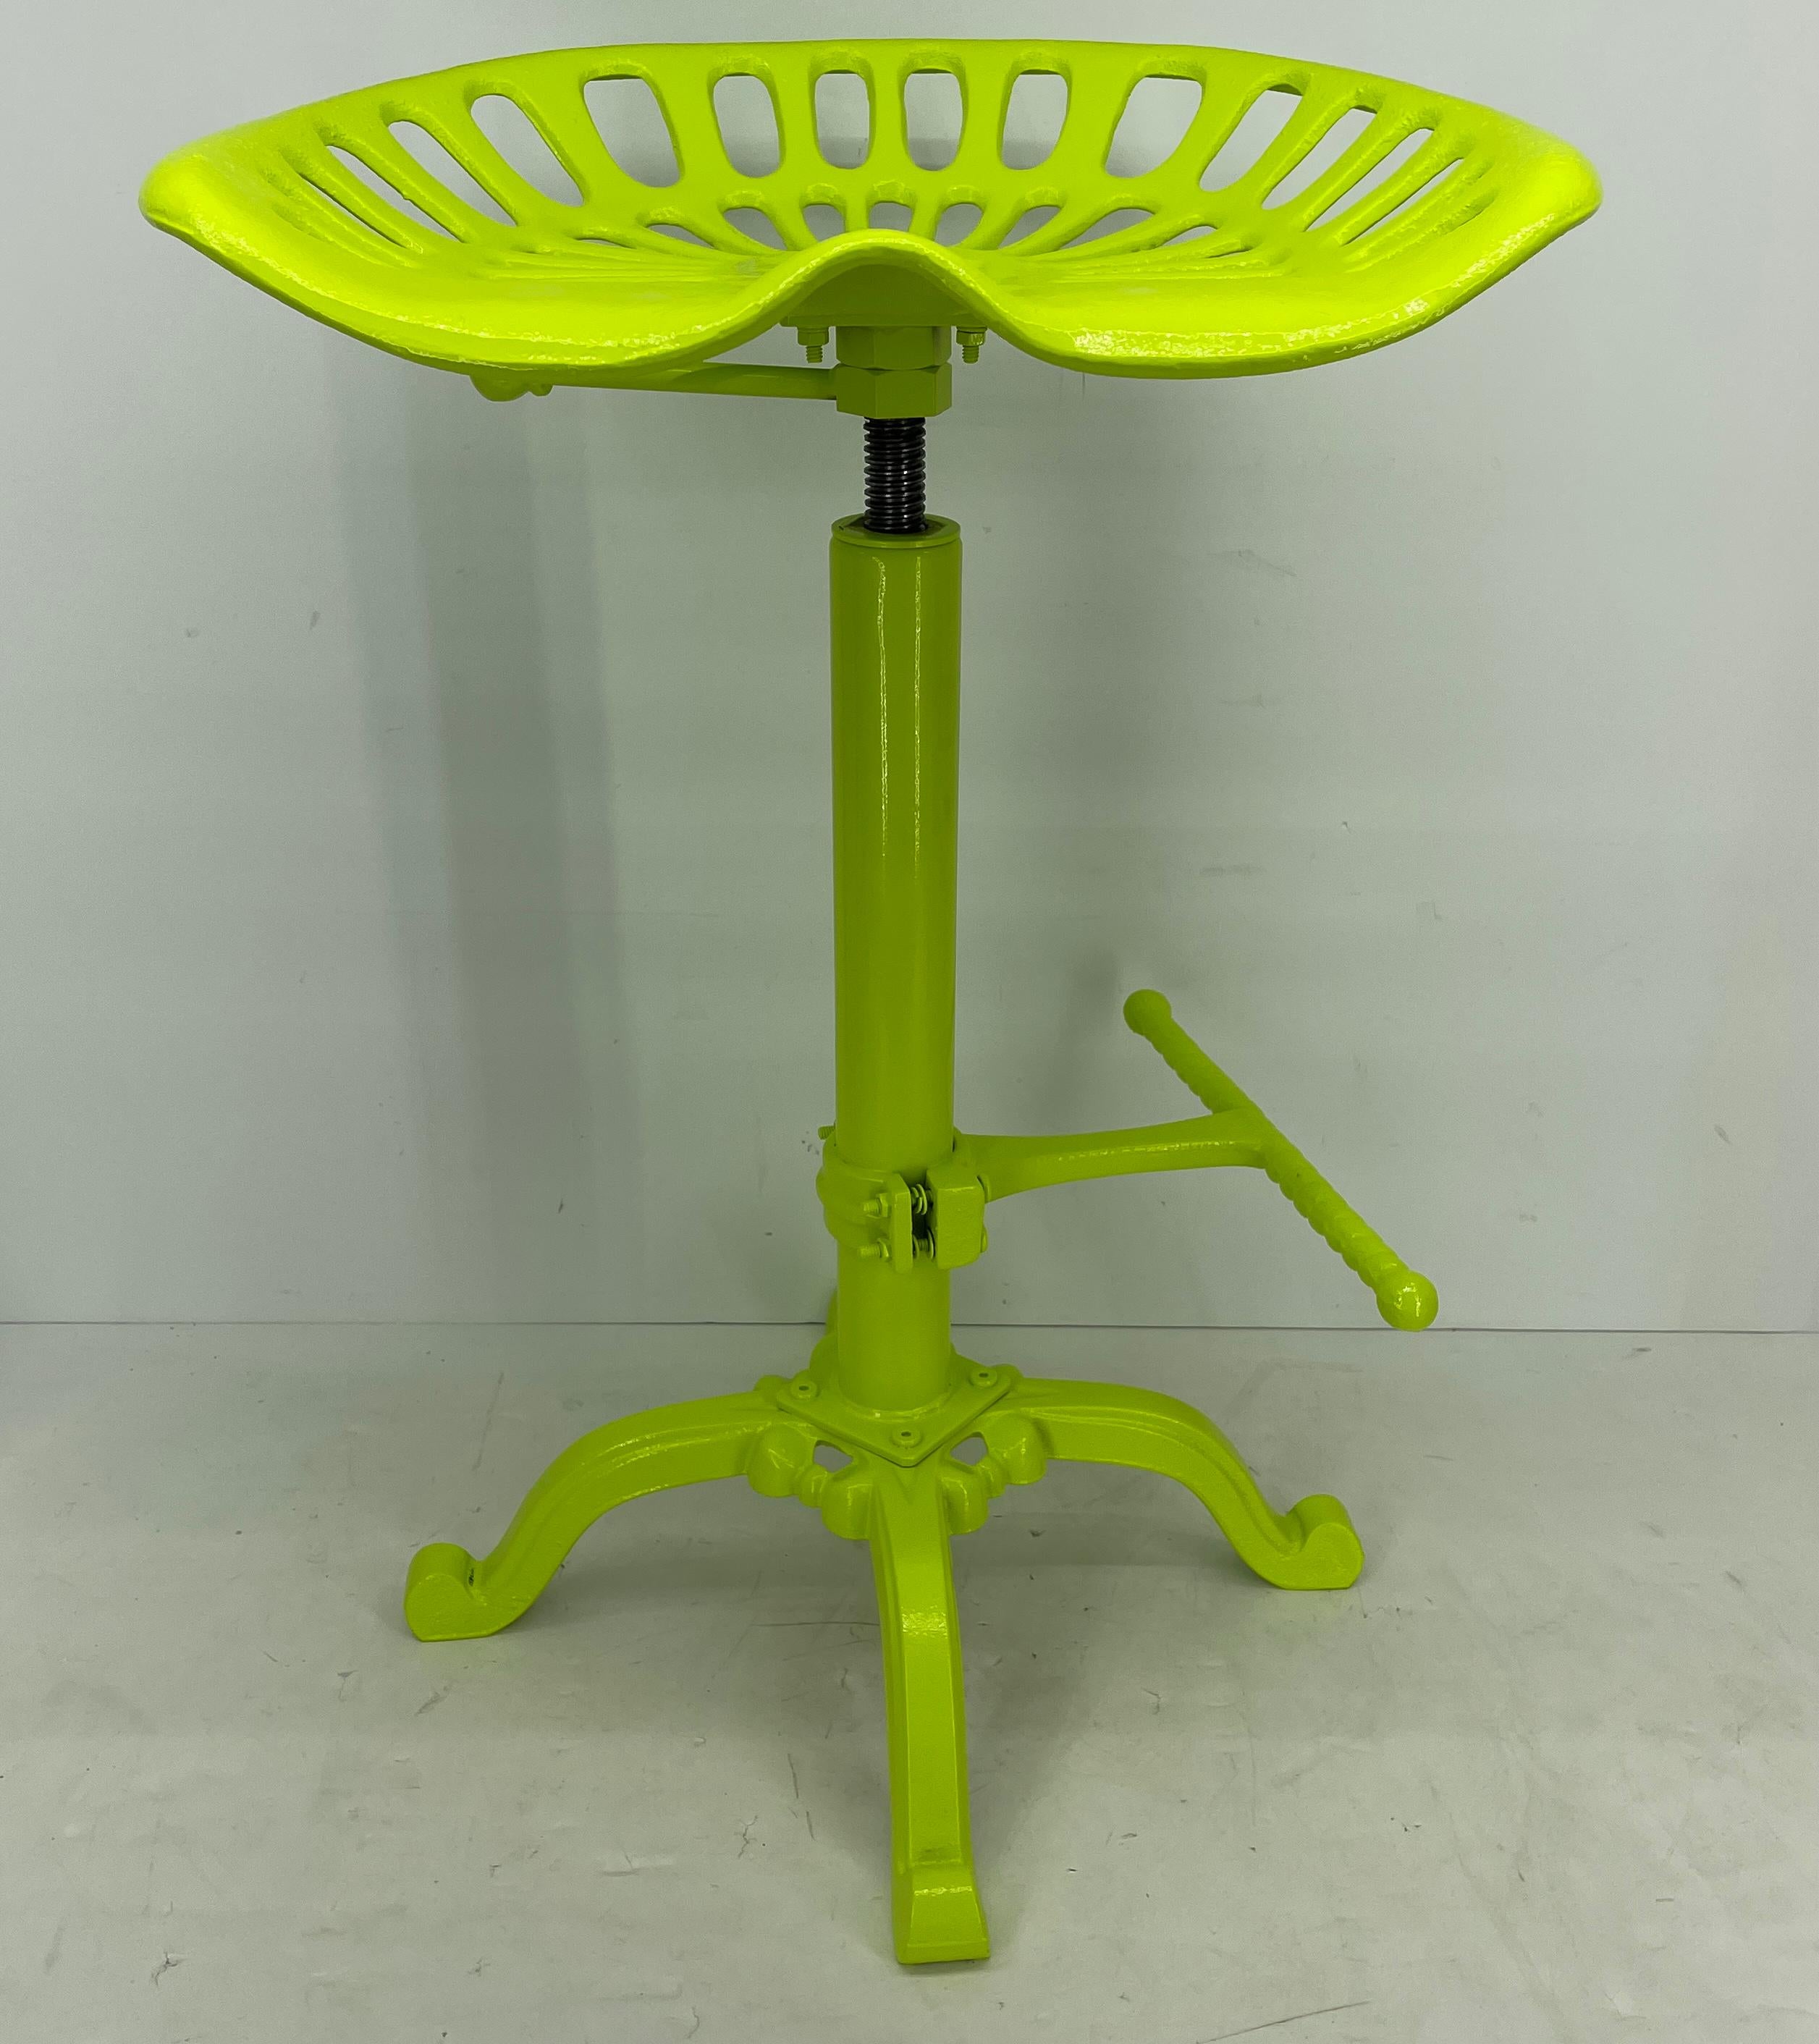 Industrial metal tractor seat stool newly powder coated in bright chartreuse. 
This bold and bright chartreuse tractor seat on a sturdy and adjustable swivel base is so much fun. The seat is counter height; comfortable and the adjustable base works